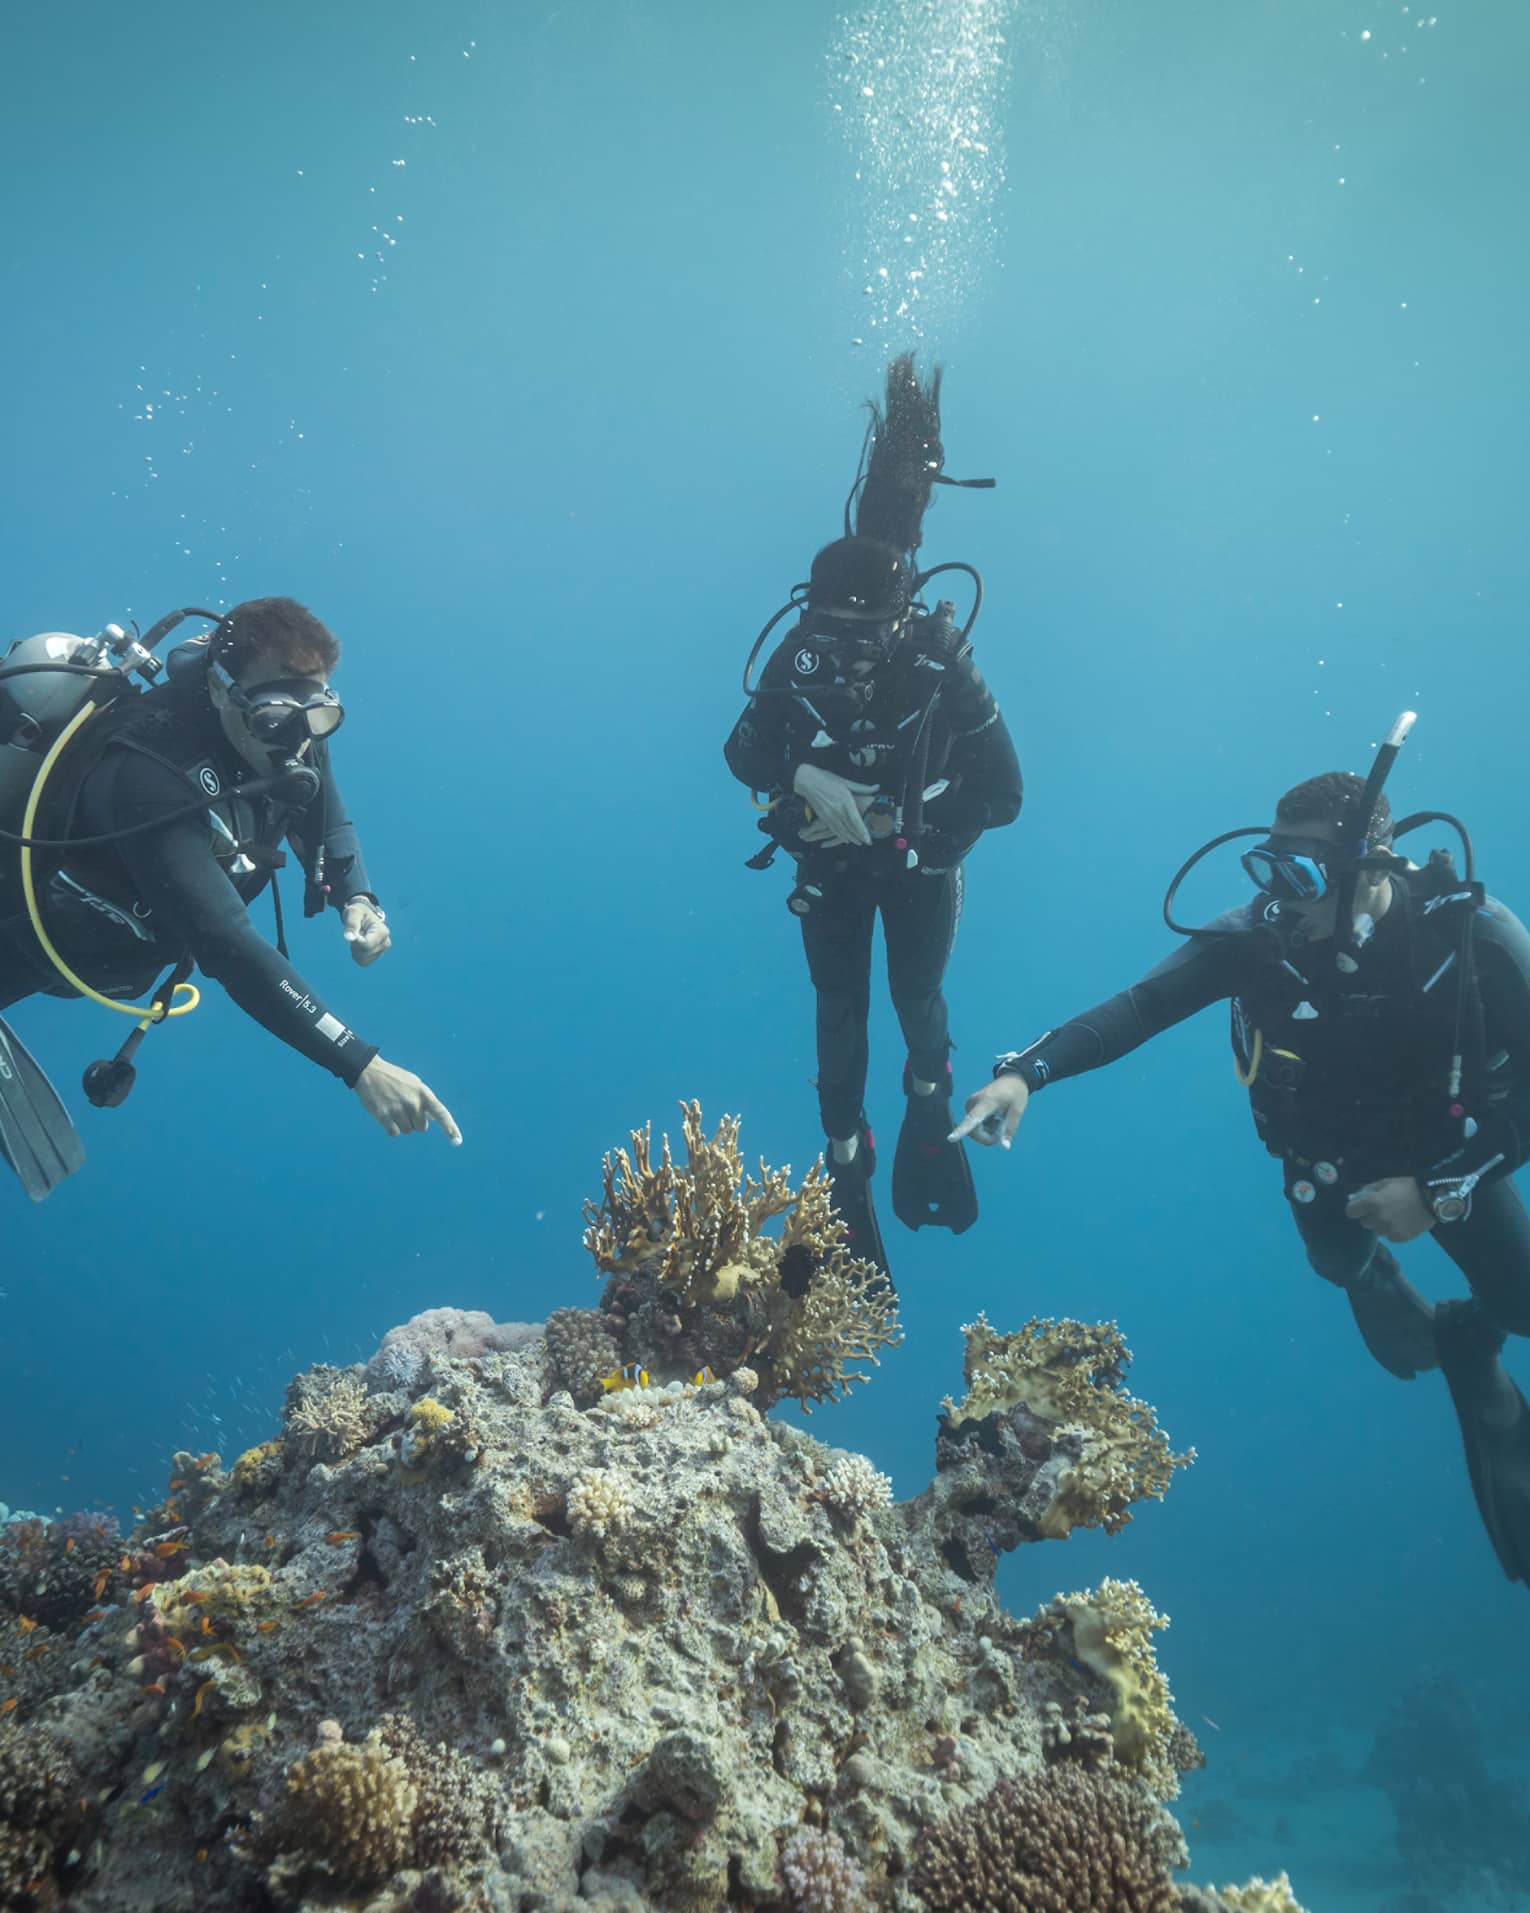 Front view of three scuba divers in clear, dark waters; two divers point at a group of yellow coral protruding from the rock.